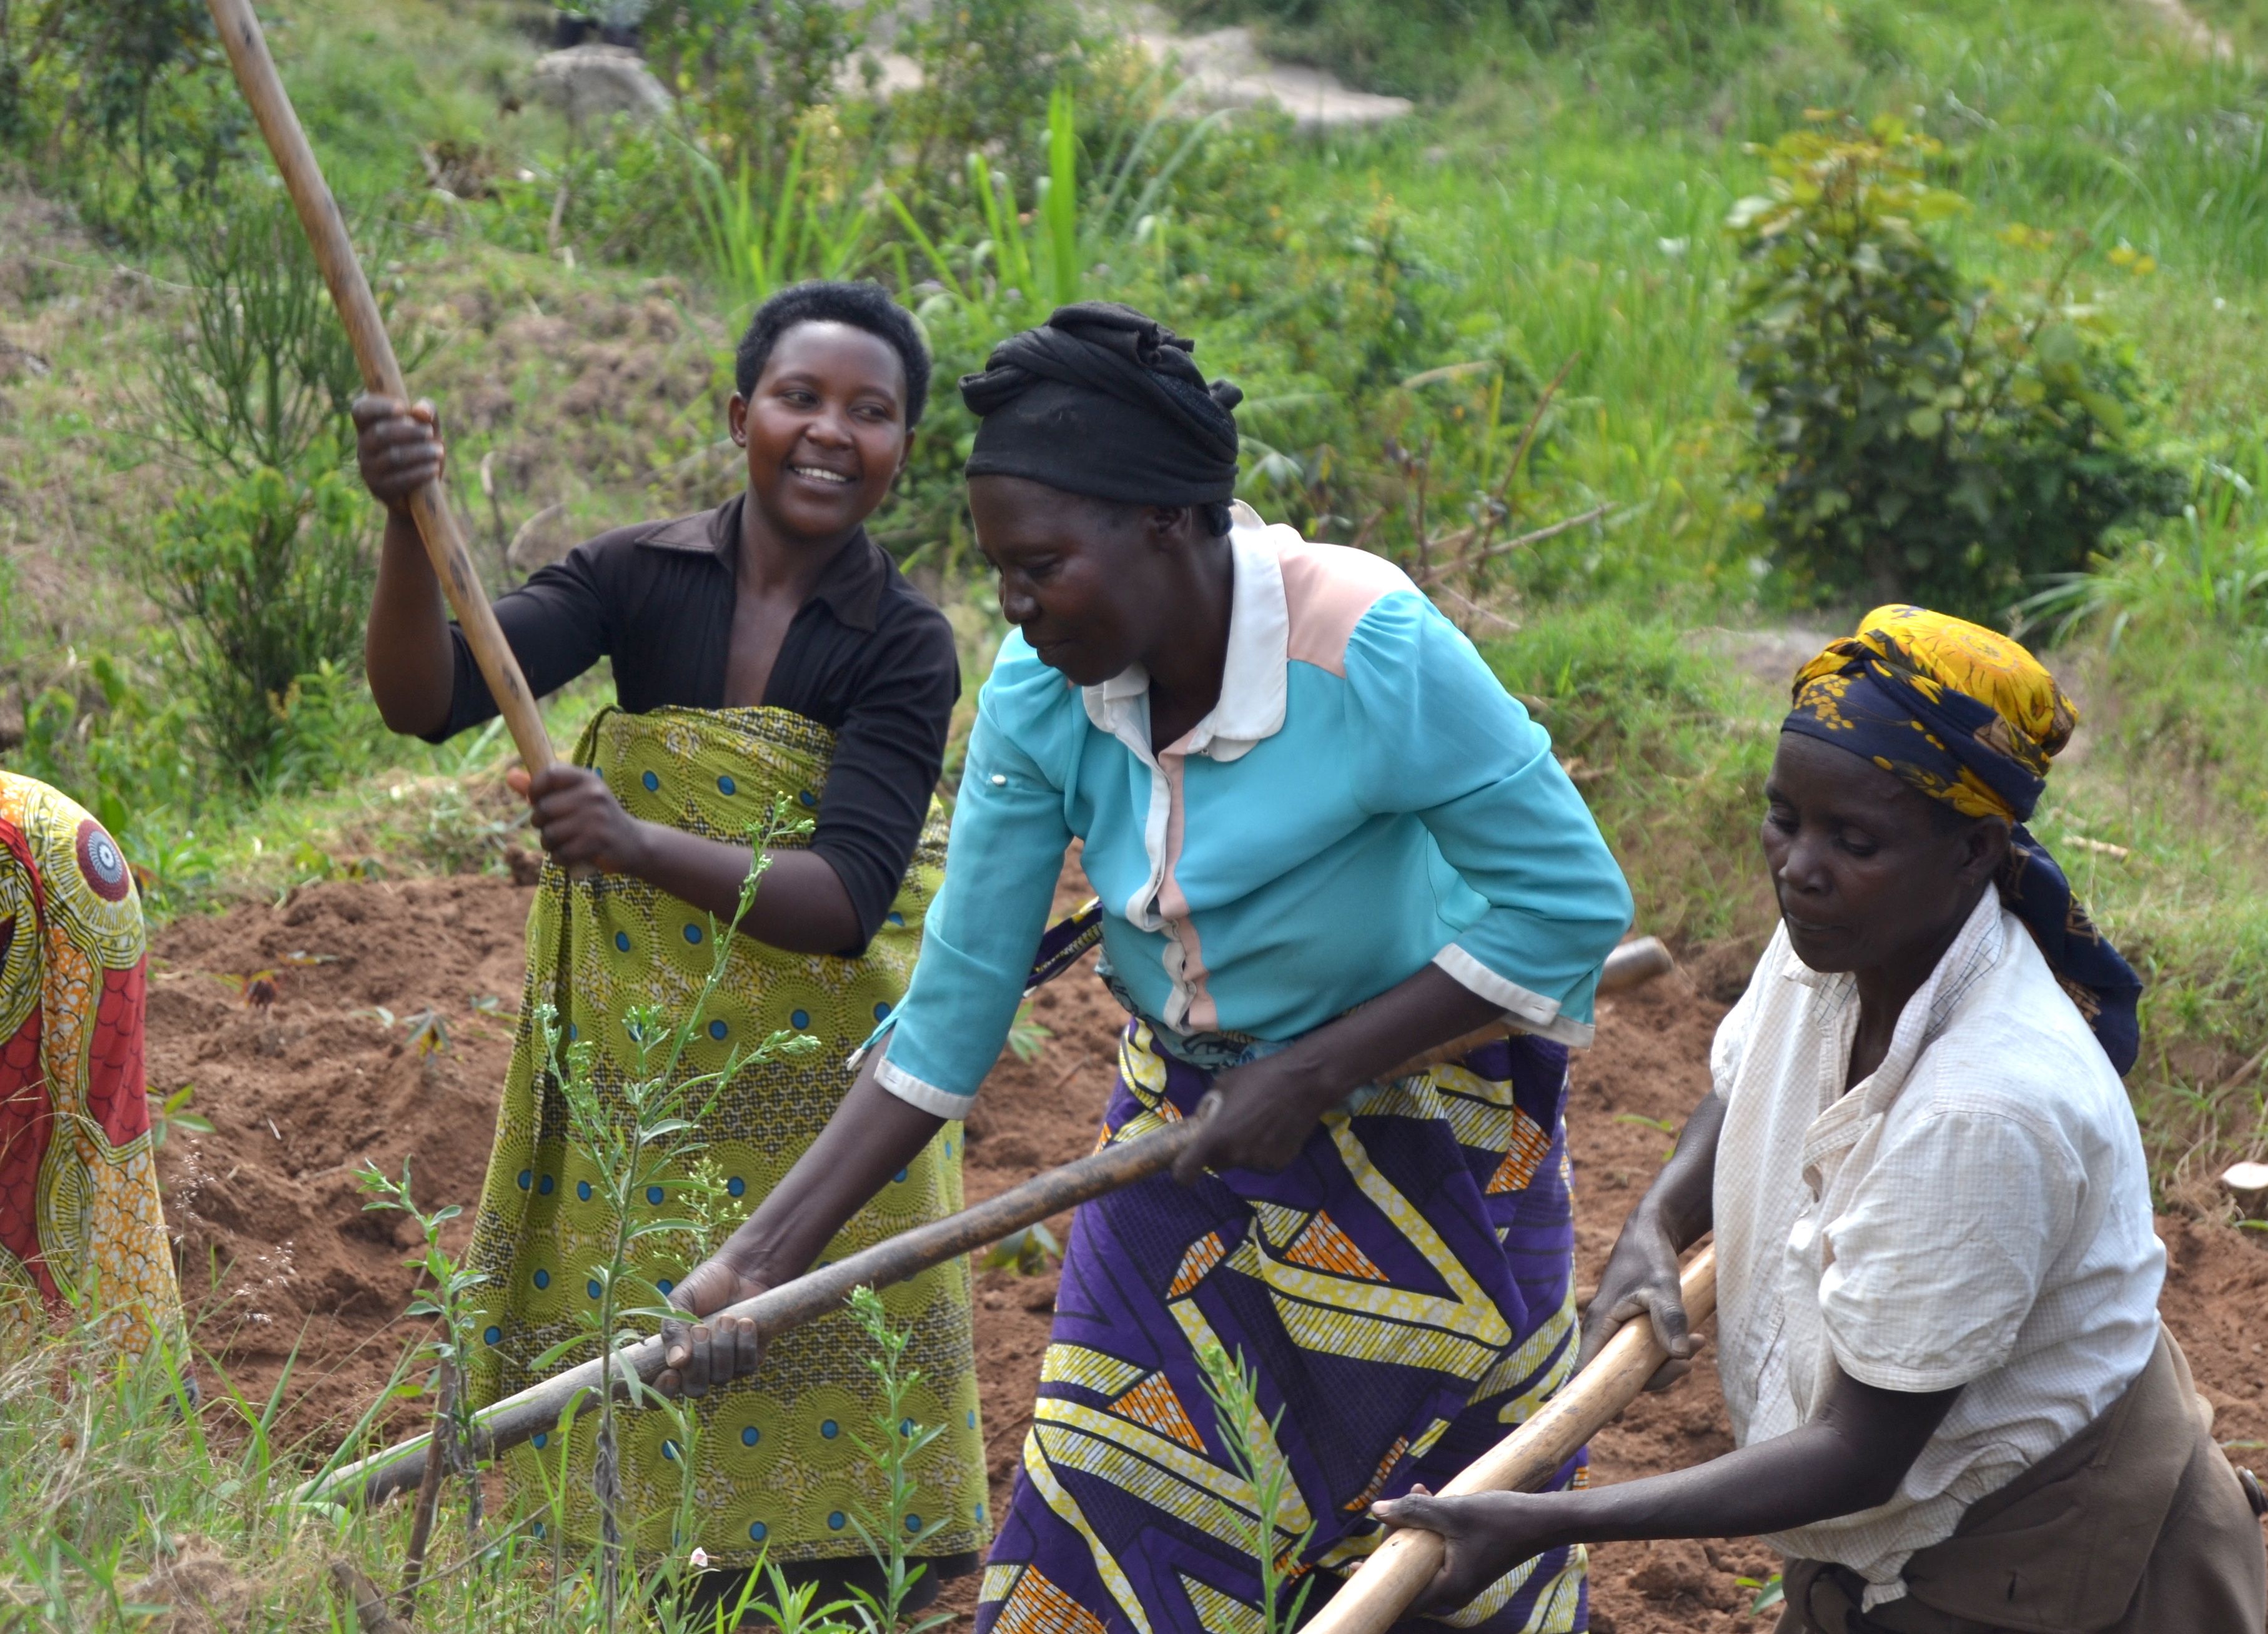 The women of the Duteraninkunga cooperative in Rwanda's Southern Province prepare the land to plant cassava, a root vegetable used for making flour. Image by Cammie Behnke. Rwanda, 2018.